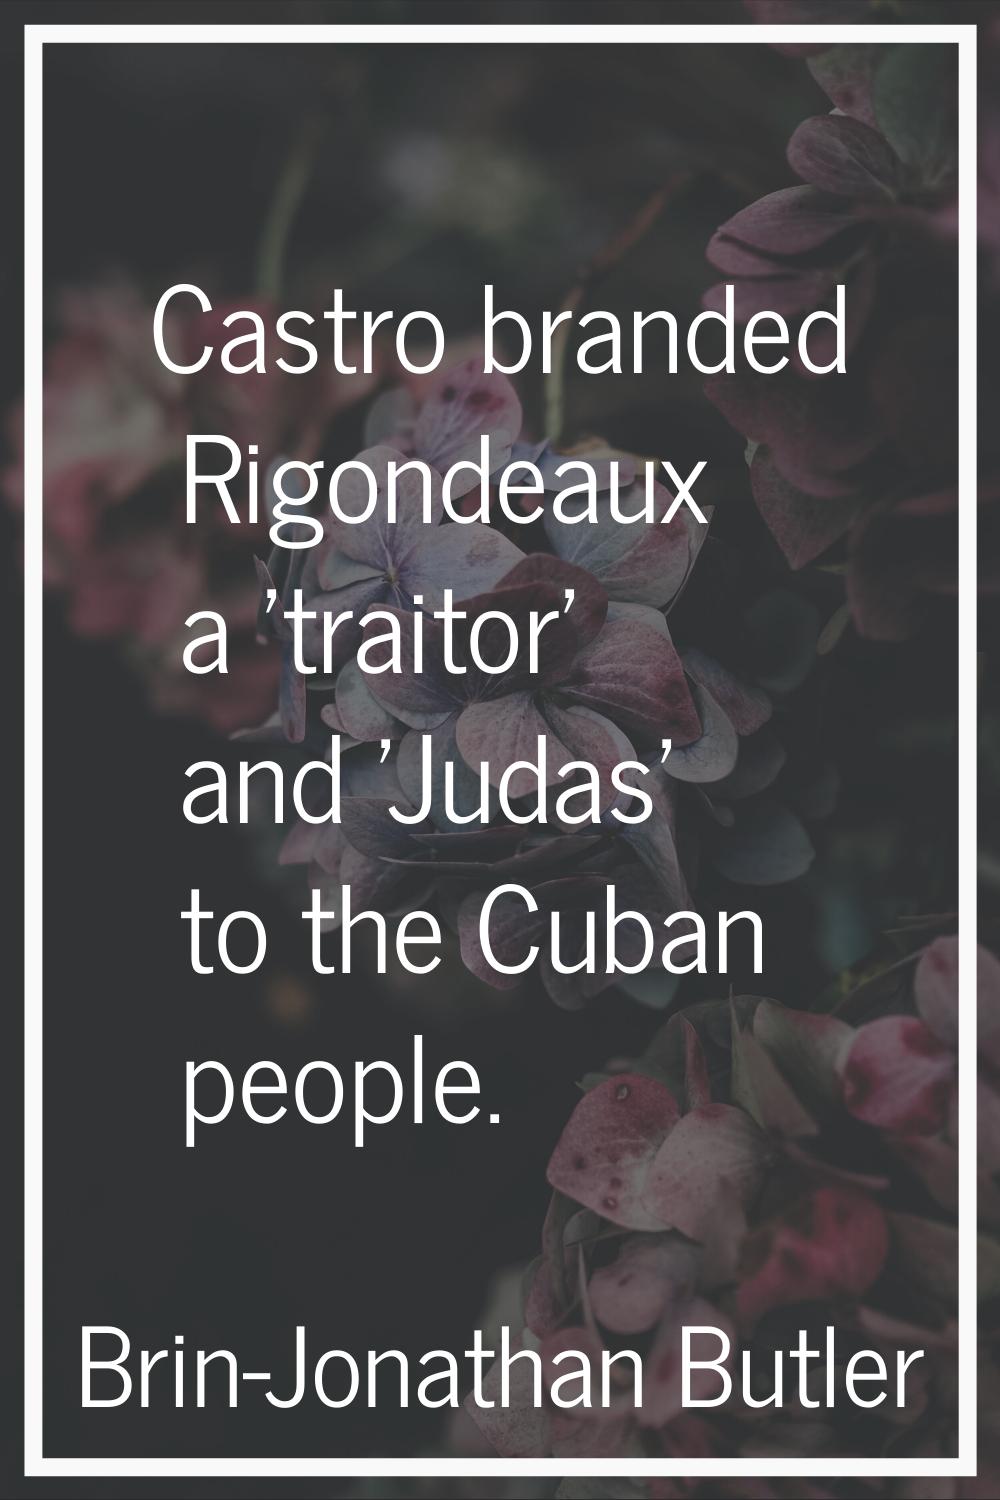 Castro branded Rigondeaux a 'traitor' and 'Judas' to the Cuban people.